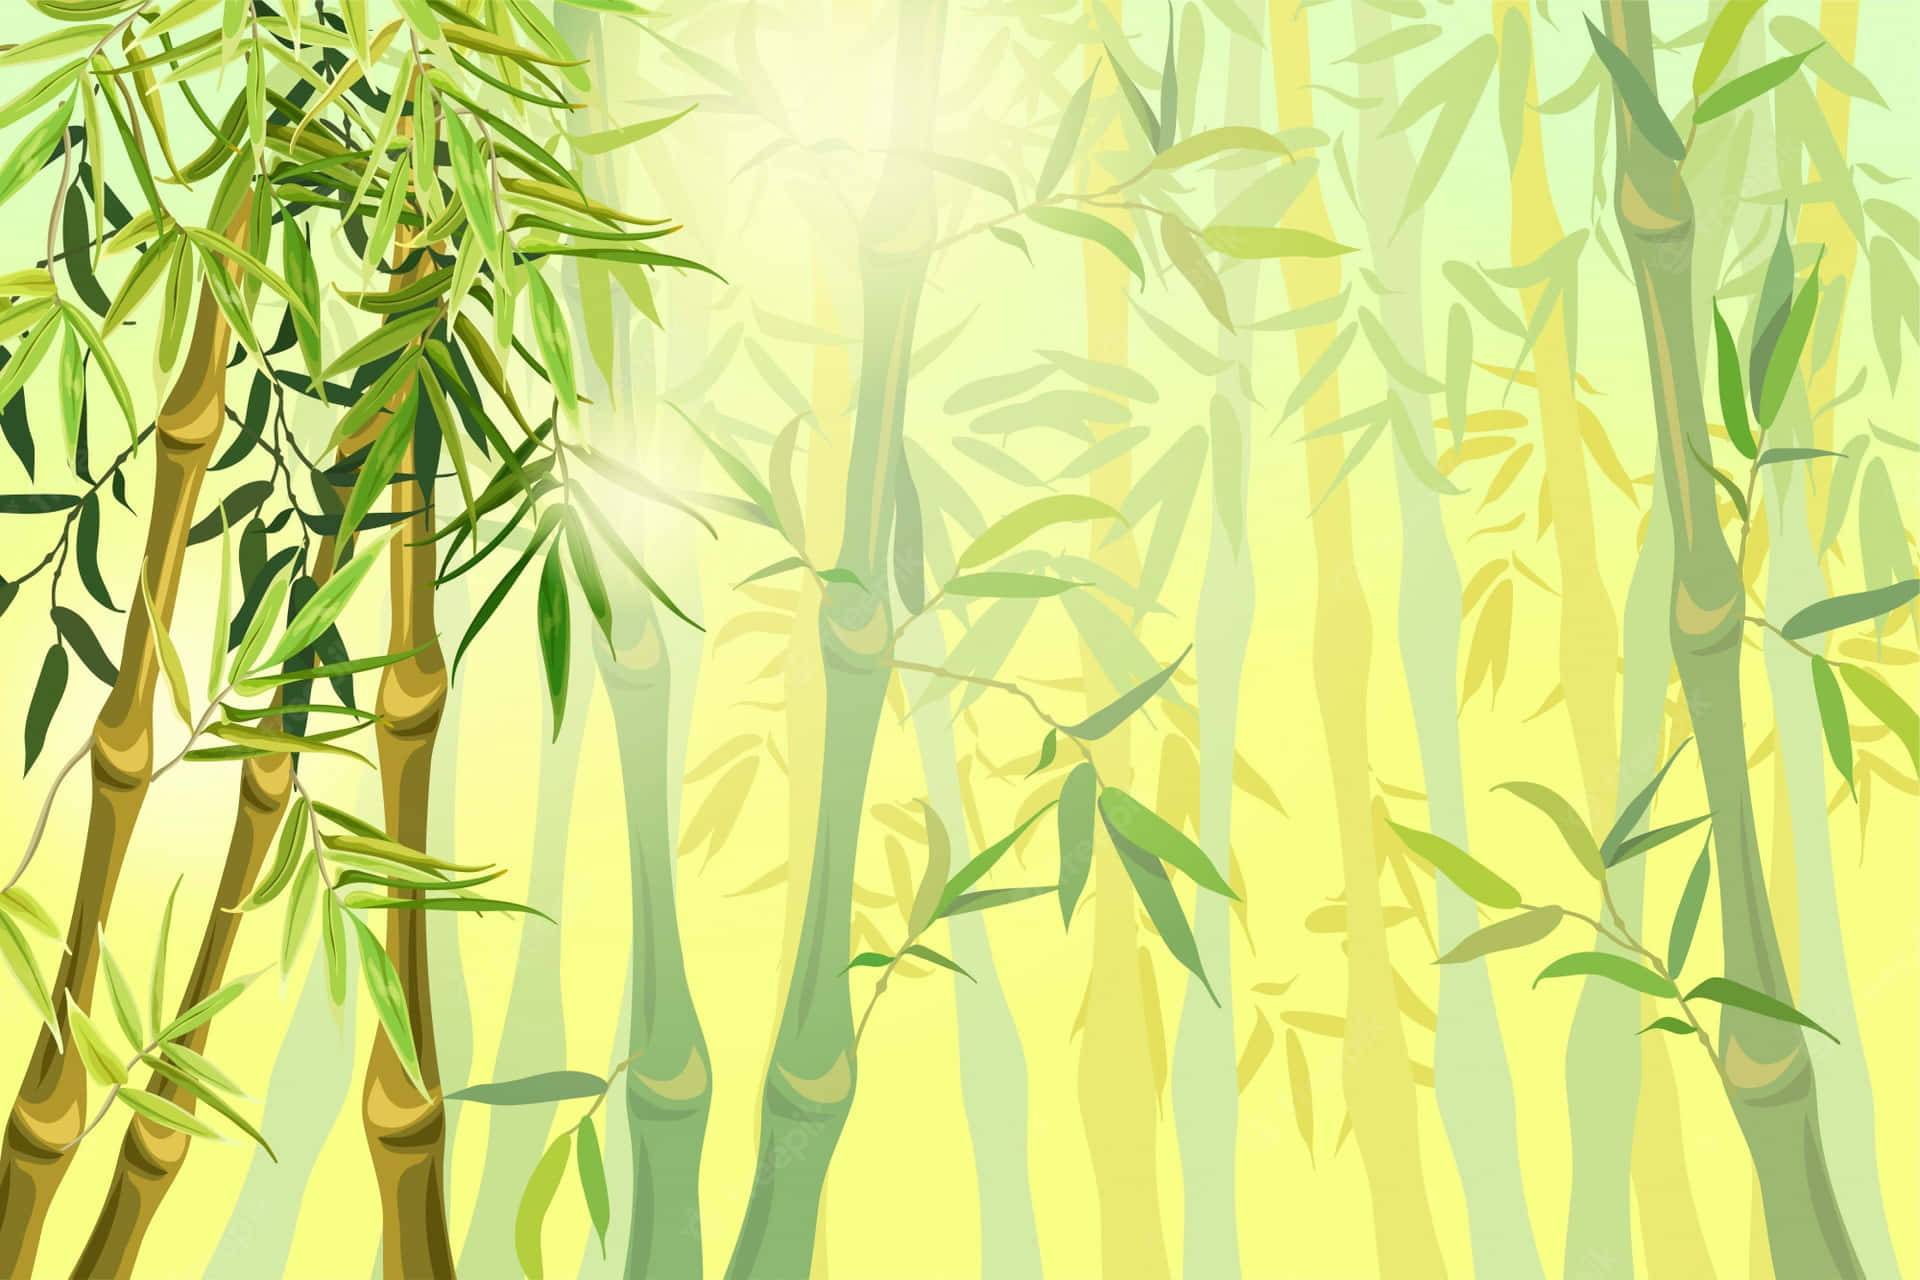 "The Beauty of Chinese Bamboo" Wallpaper